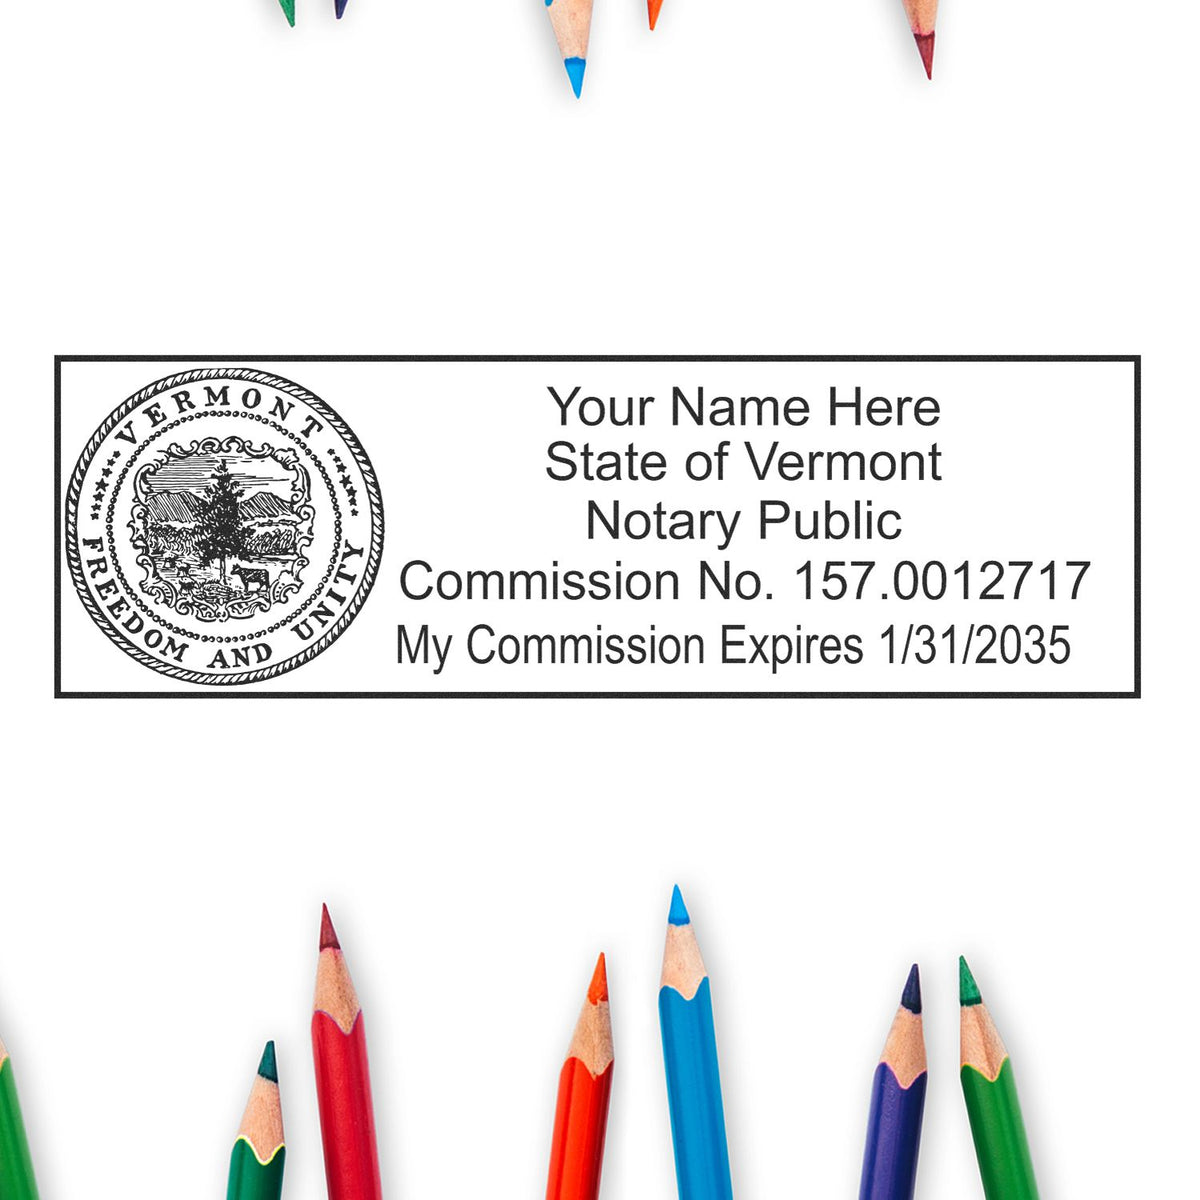 A photograph of the MaxLight Premium Pre-Inked Vermont State Seal Notarial Stamp stamp impression reveals a vivid, professional image of the on paper.